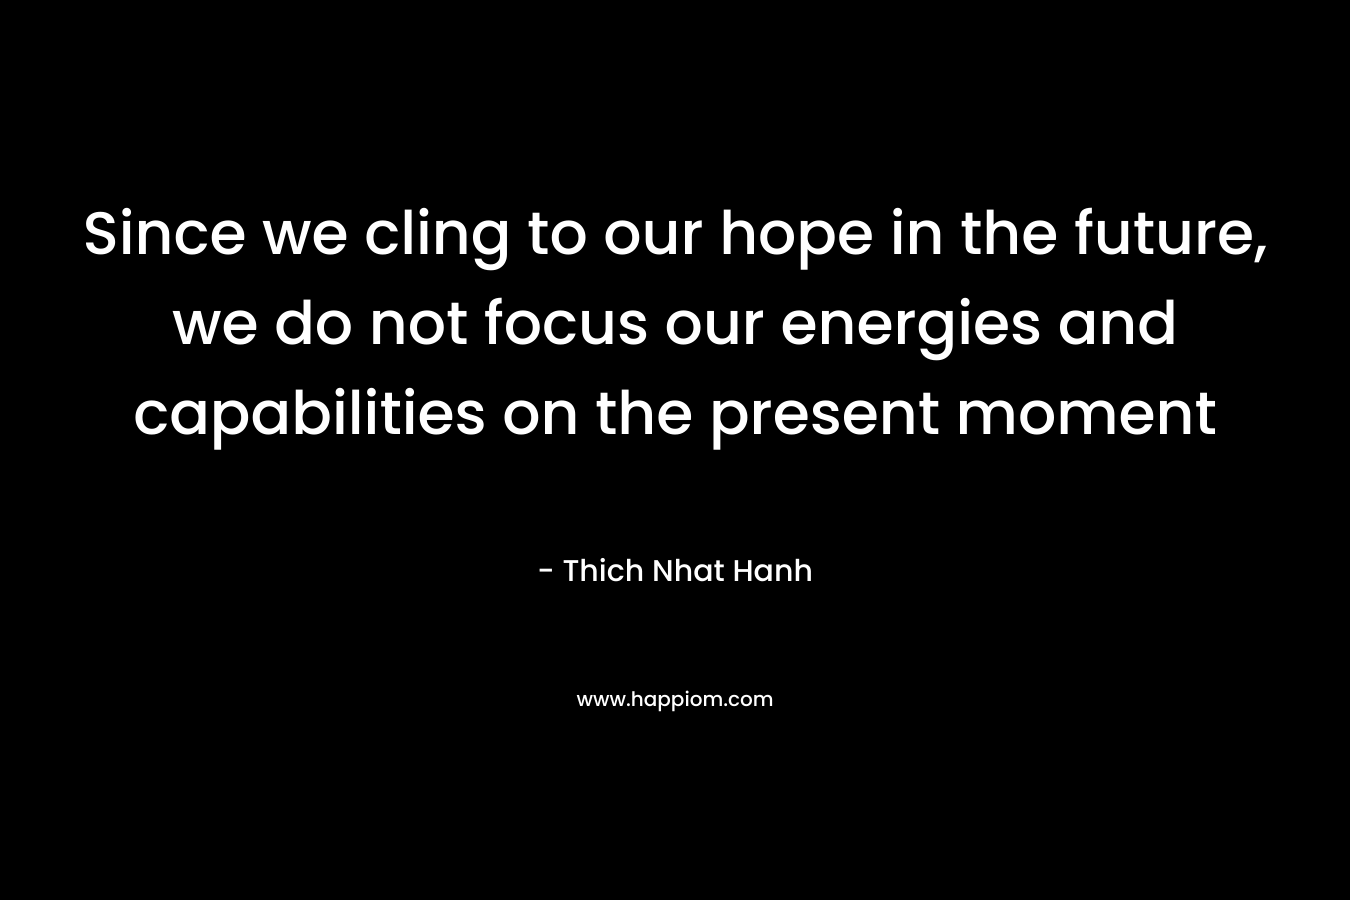 Since we cling to our hope in the future, we do not focus our energies and capabilities on the present moment